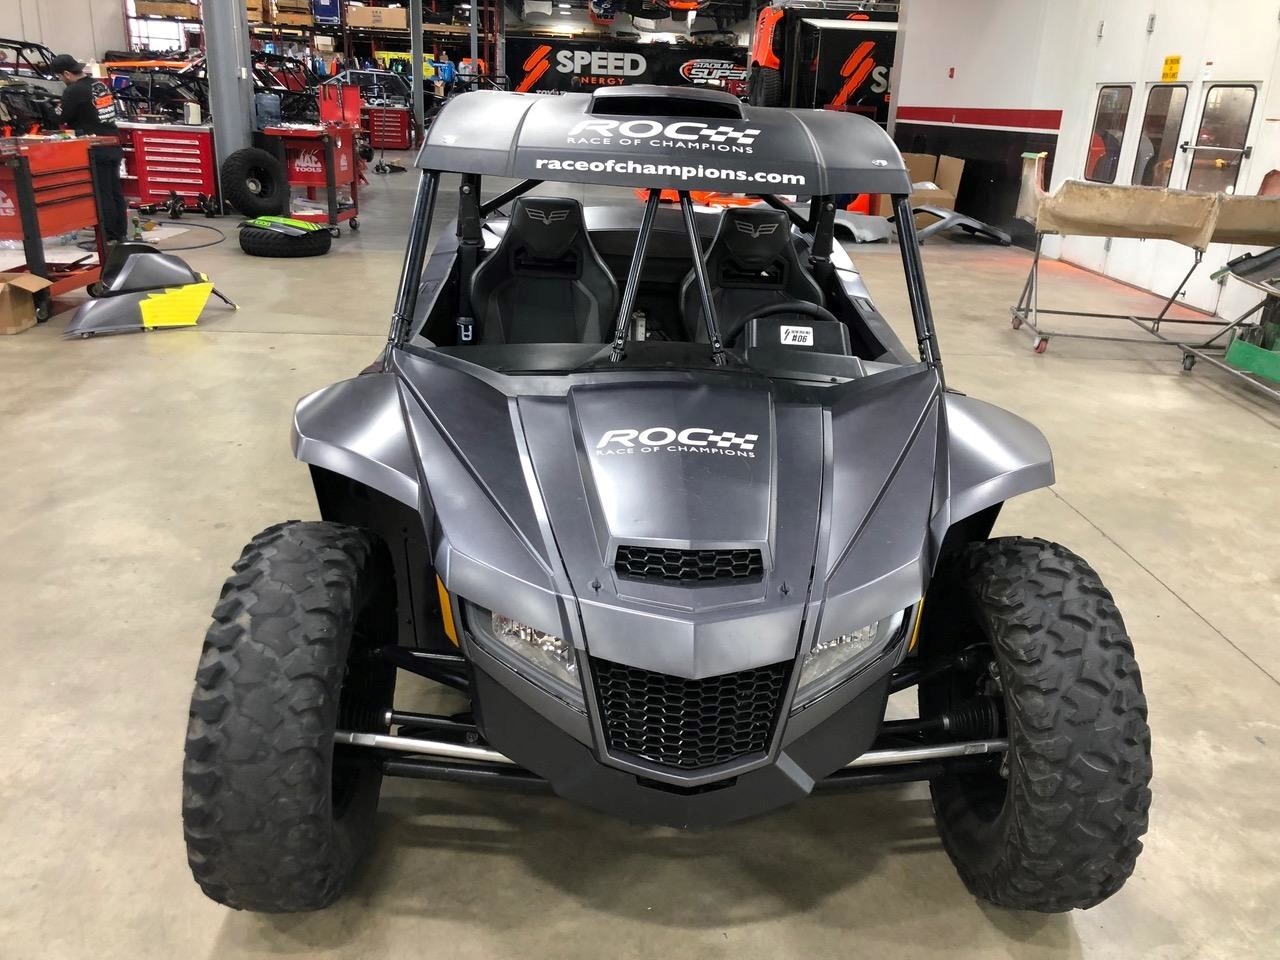 Gordon's shop prepares special vehicles for Race of Champions